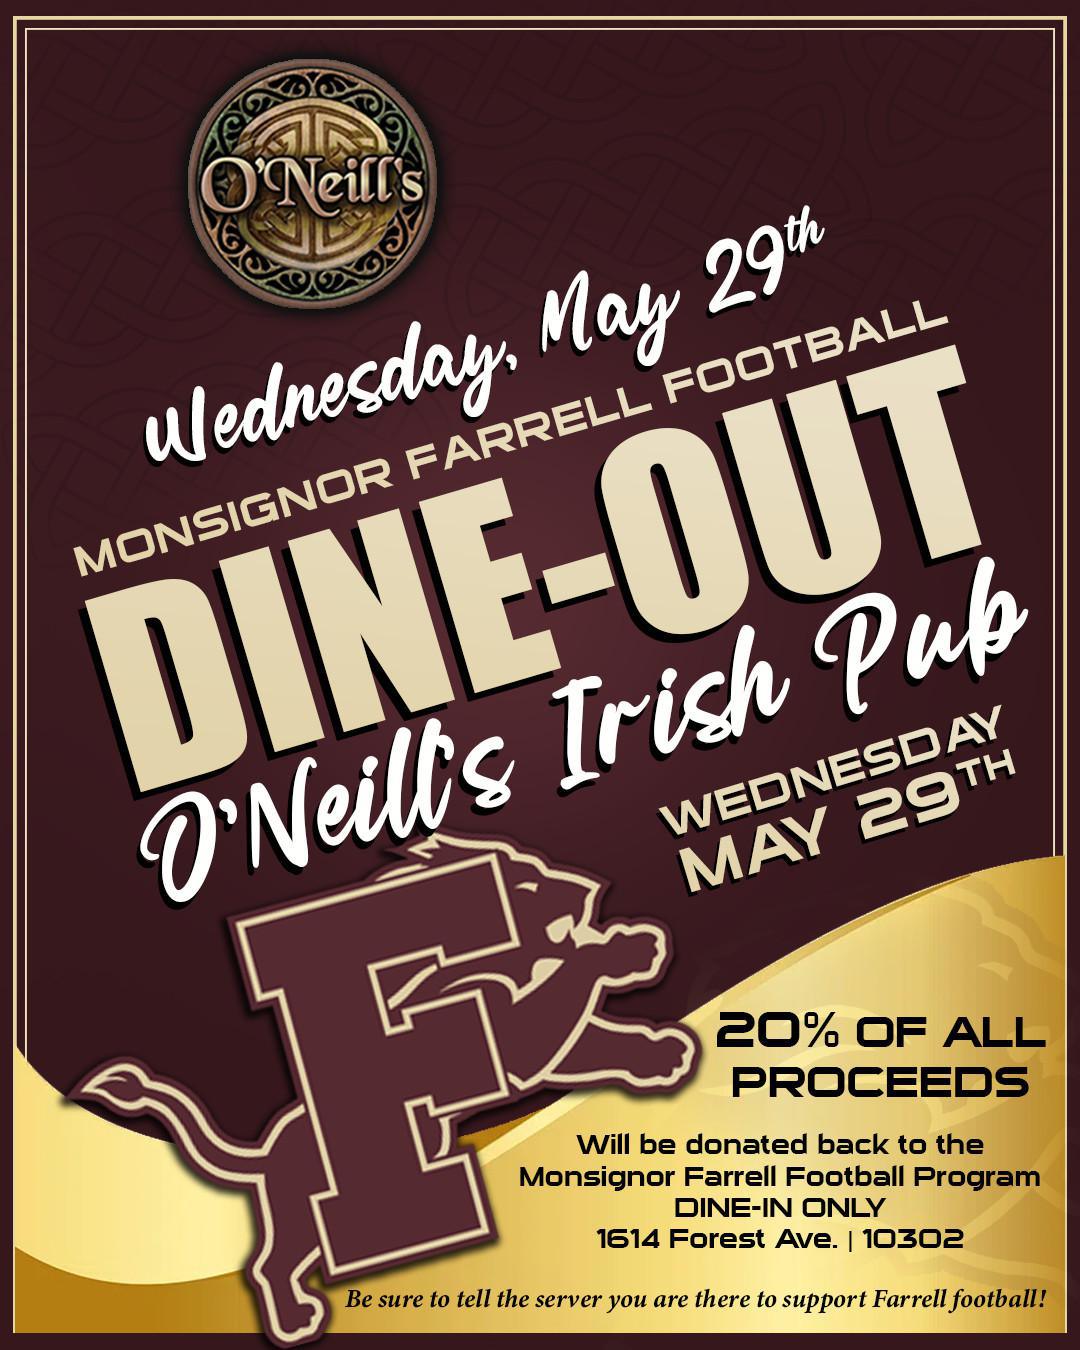 Football Dine-Out at O'Neill's